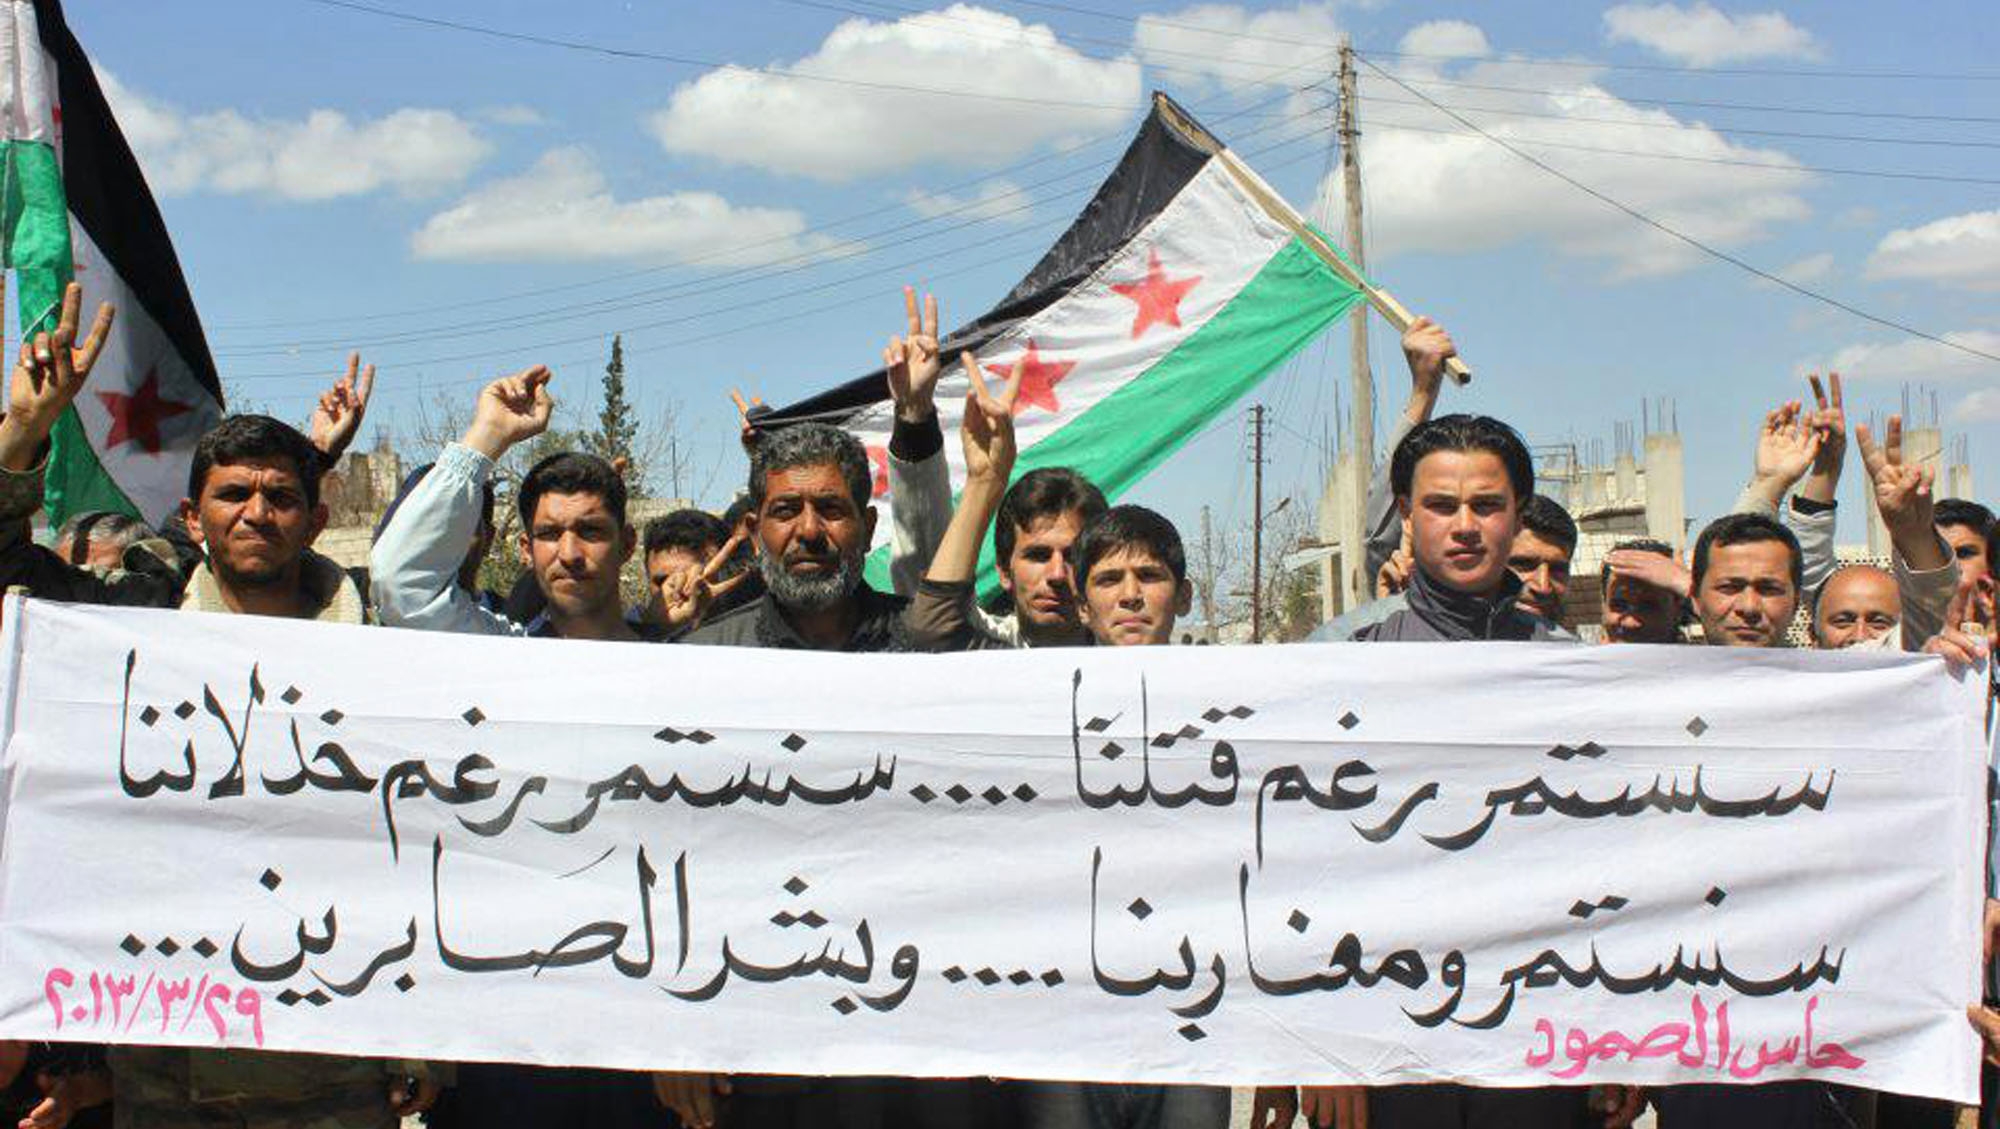 Anti-Syrian regime protesters hold a banner and Syrian revolution flags during a demonstration in the town of Haas in the northwestern province of Idlib, Syria. (AP)